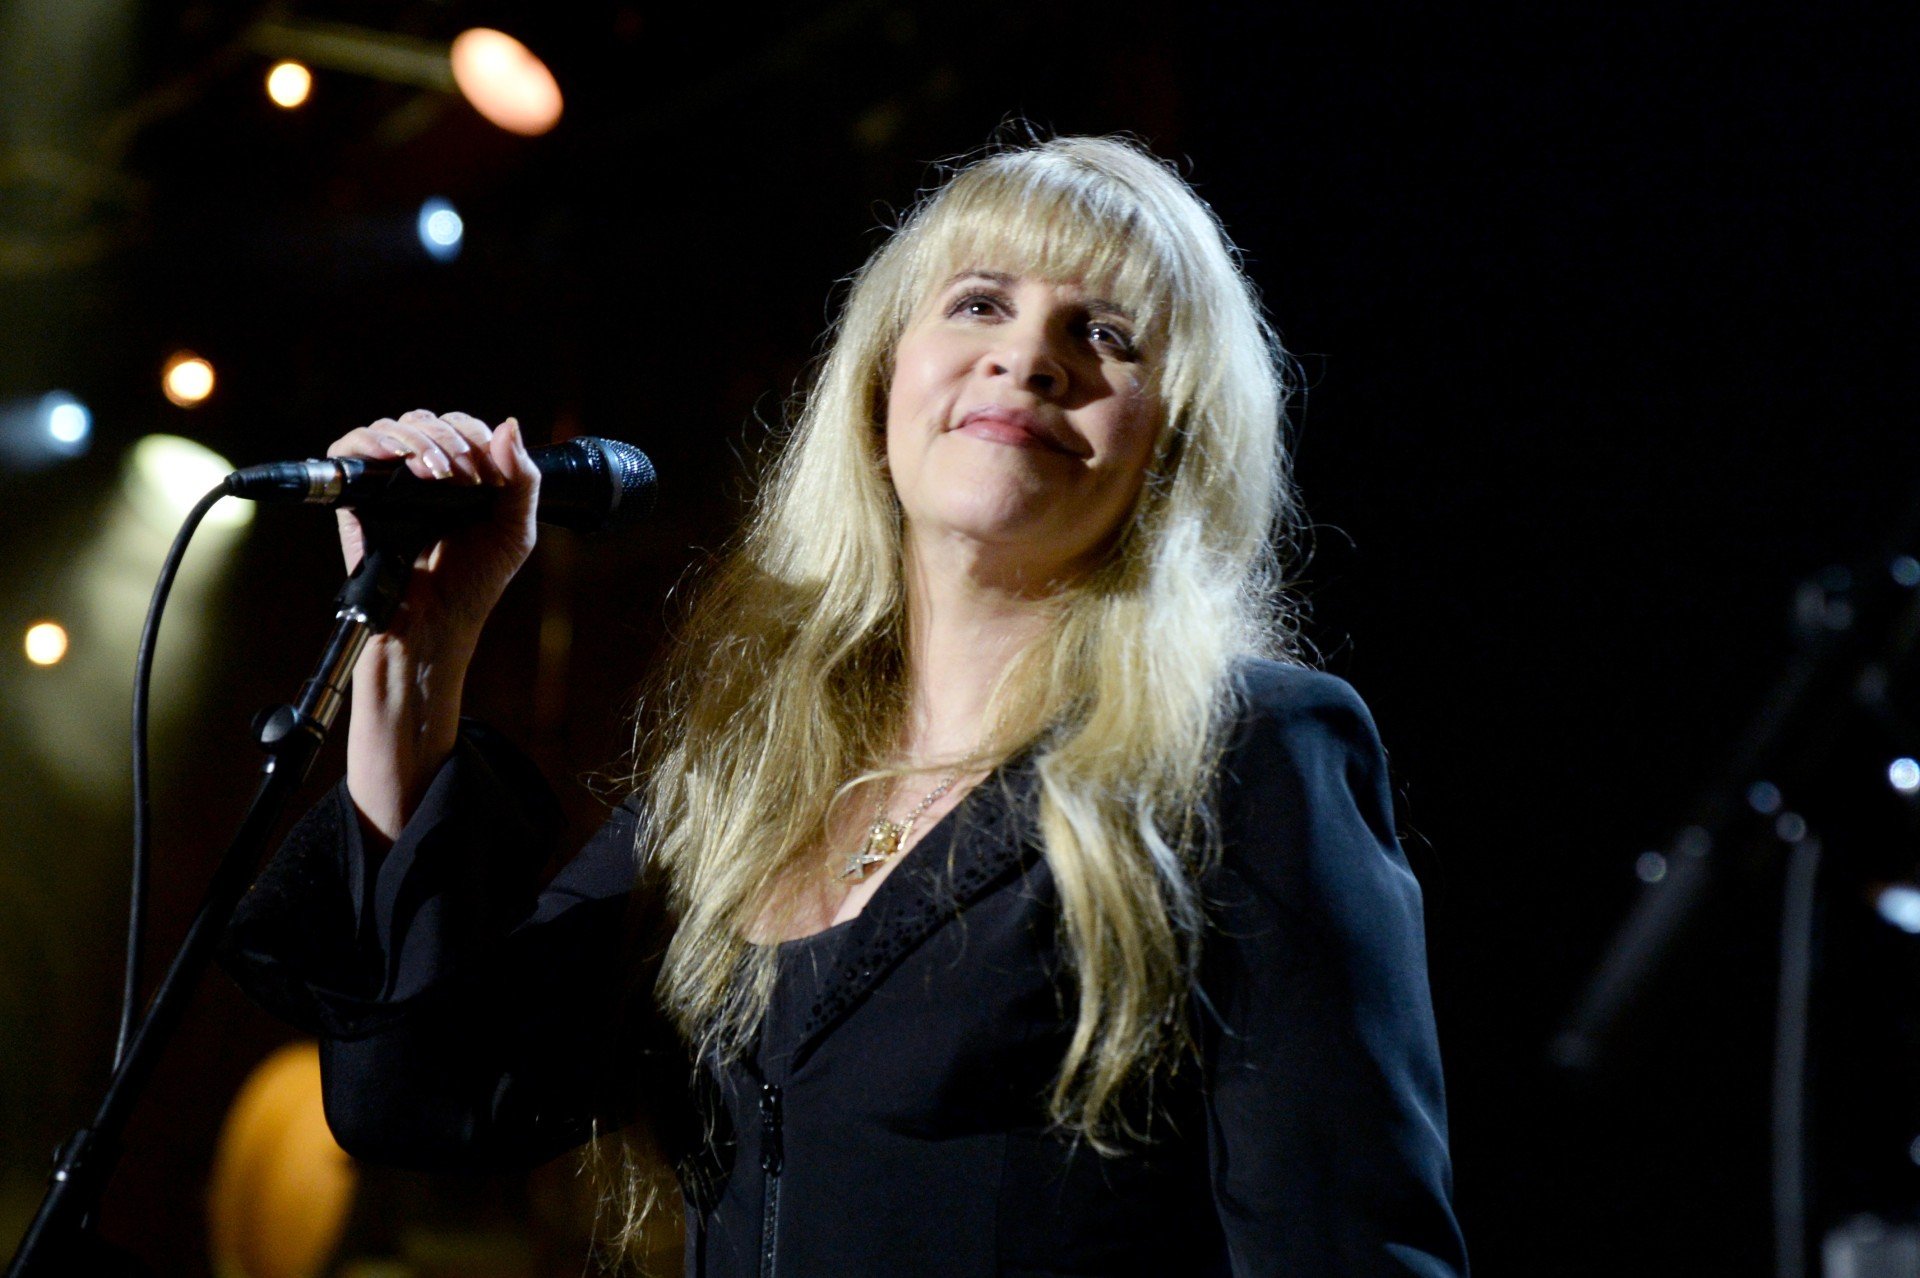 Stevie Nicks Net Worth and How She Became Famous